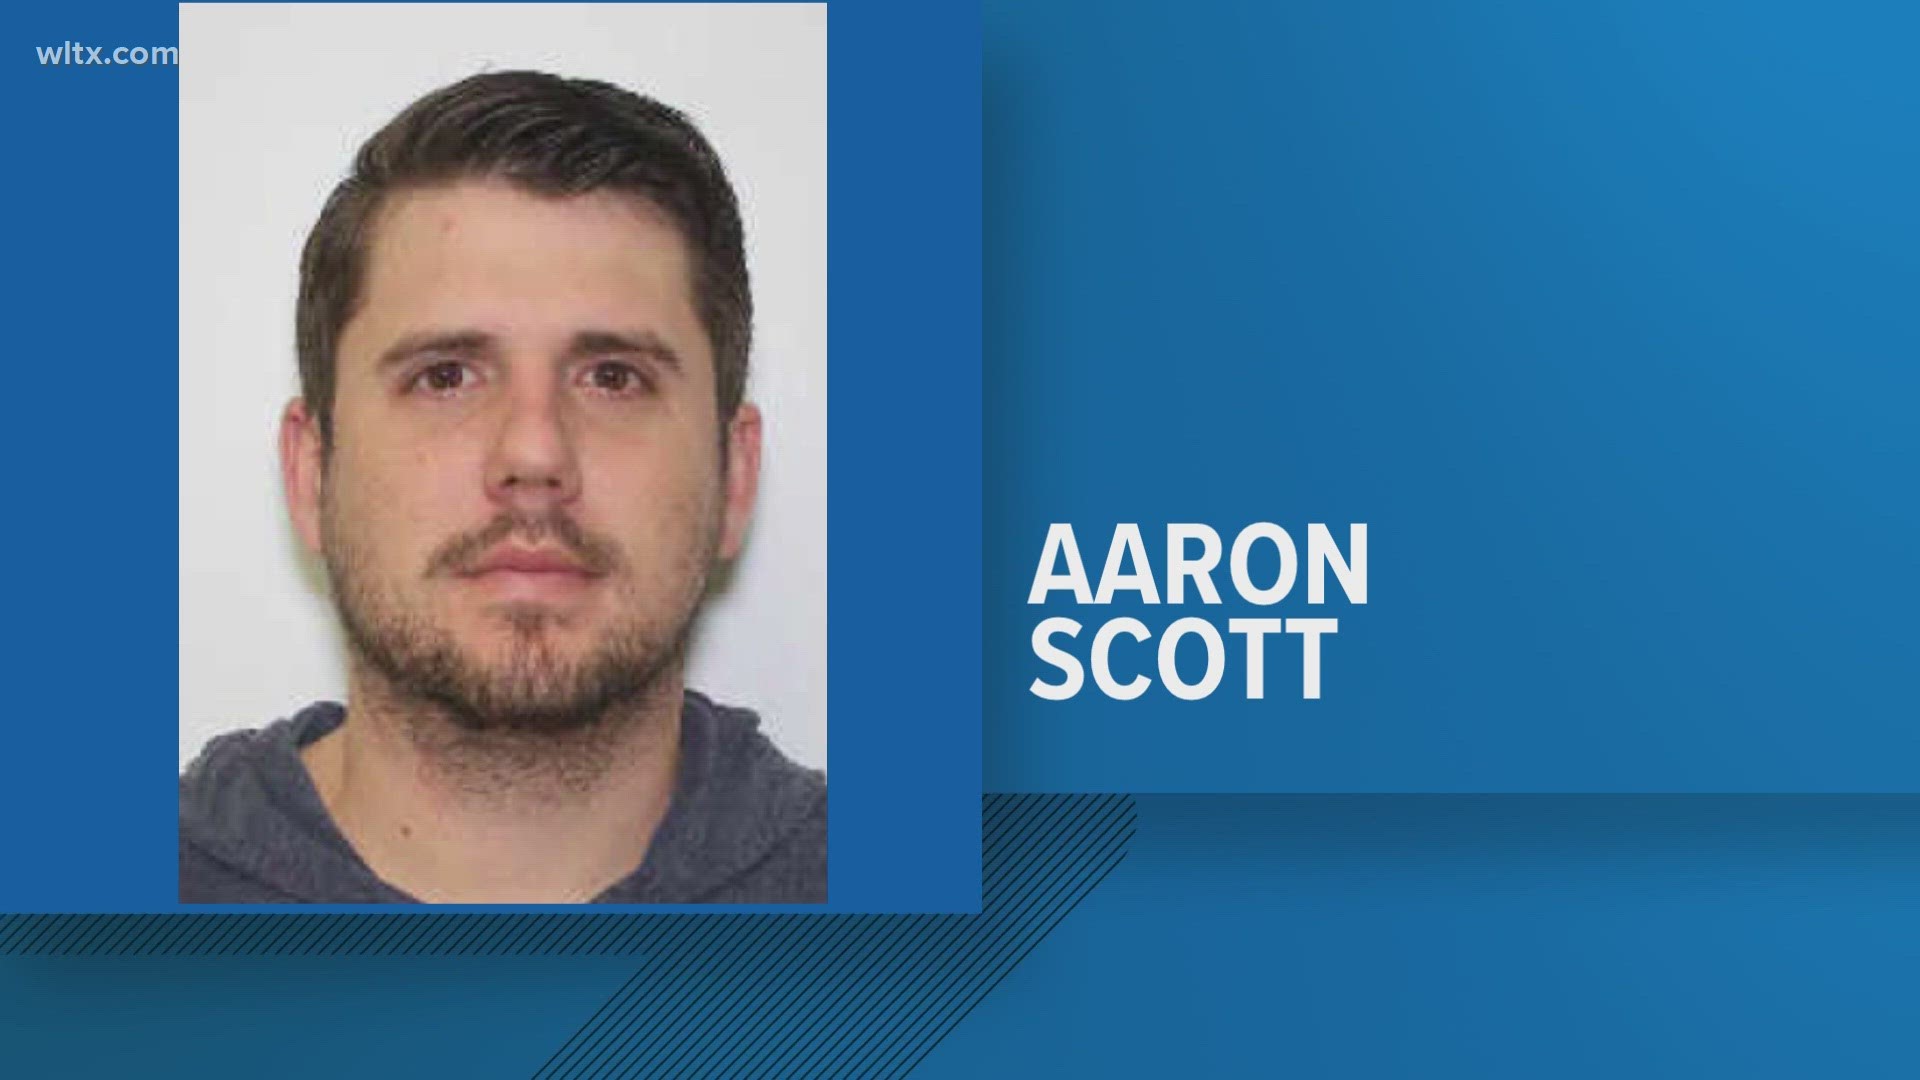 34-year-old Aaron Scott was last seen on February 25th at "Any Lengths" recovery in Sumter.